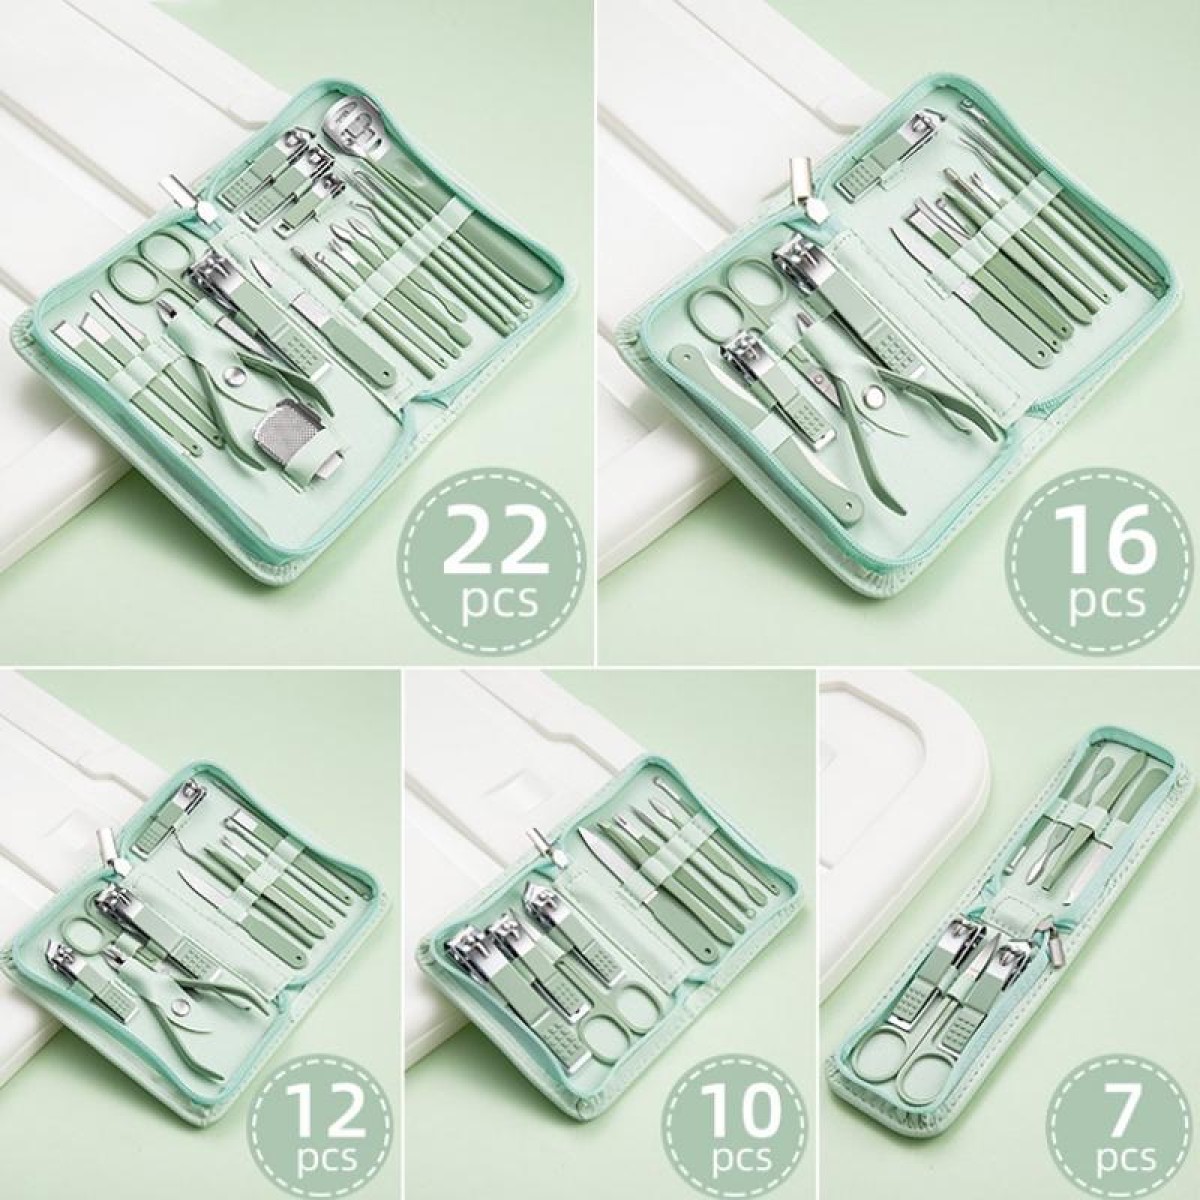 Stainless Steel Nail Clipper Nail Art Tool Set, Color: 7 PCS/Set (Green)